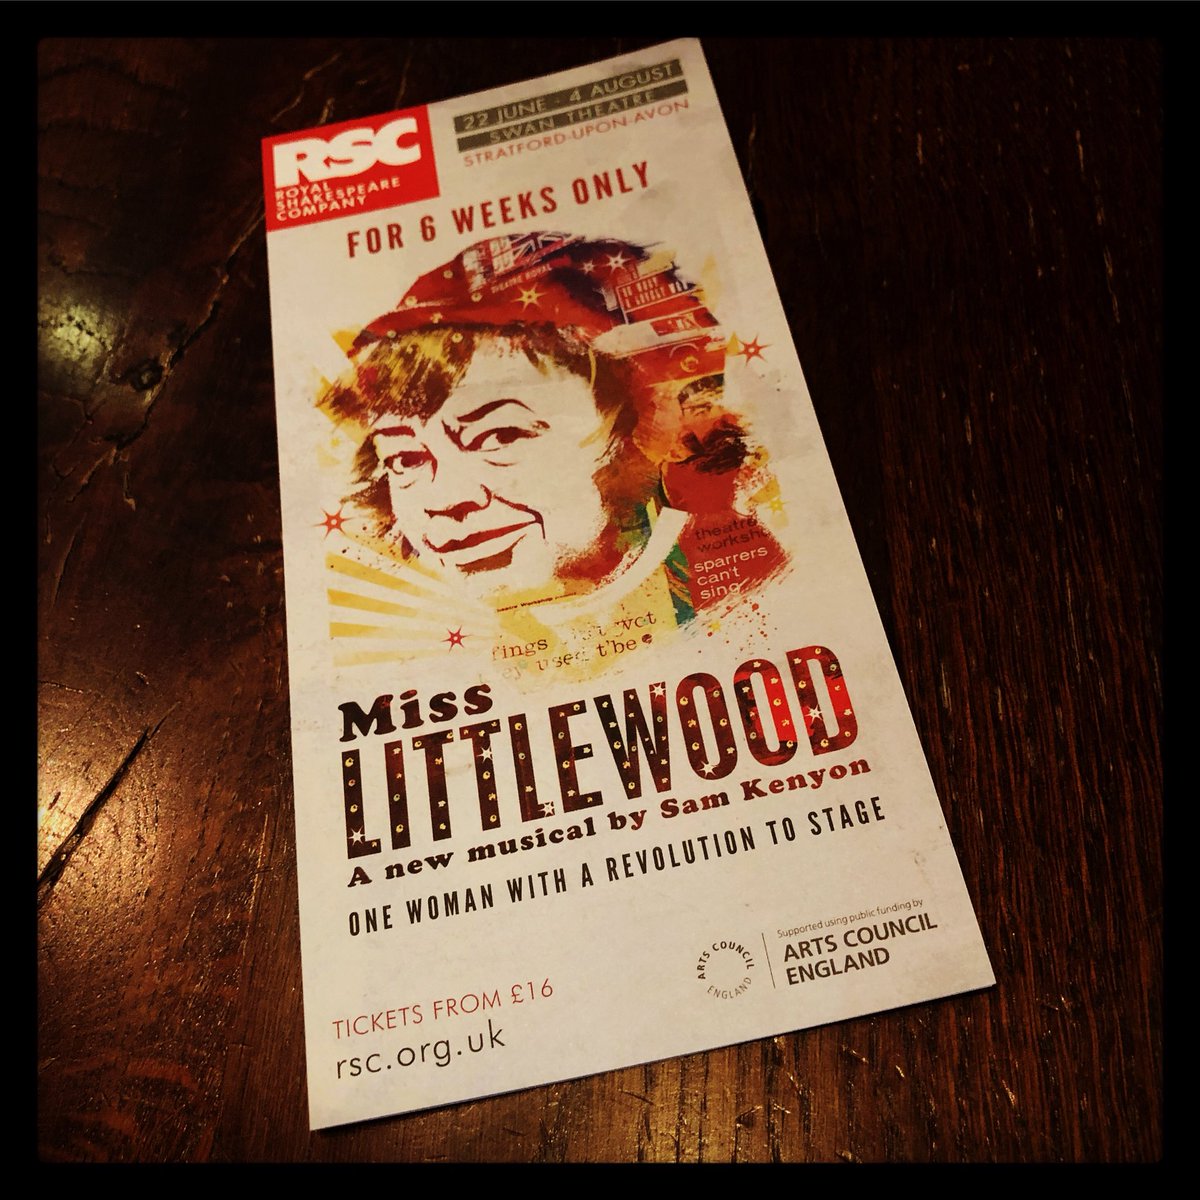 is spending the afternoon with @MissLittlewood @RSCPress @ogleforth @TheRSC @EricaWhyman @LauraElsworthy  #FunPalaces @DaisyKateBadger #RSCLittlewood @Sandysferret @Hadingue